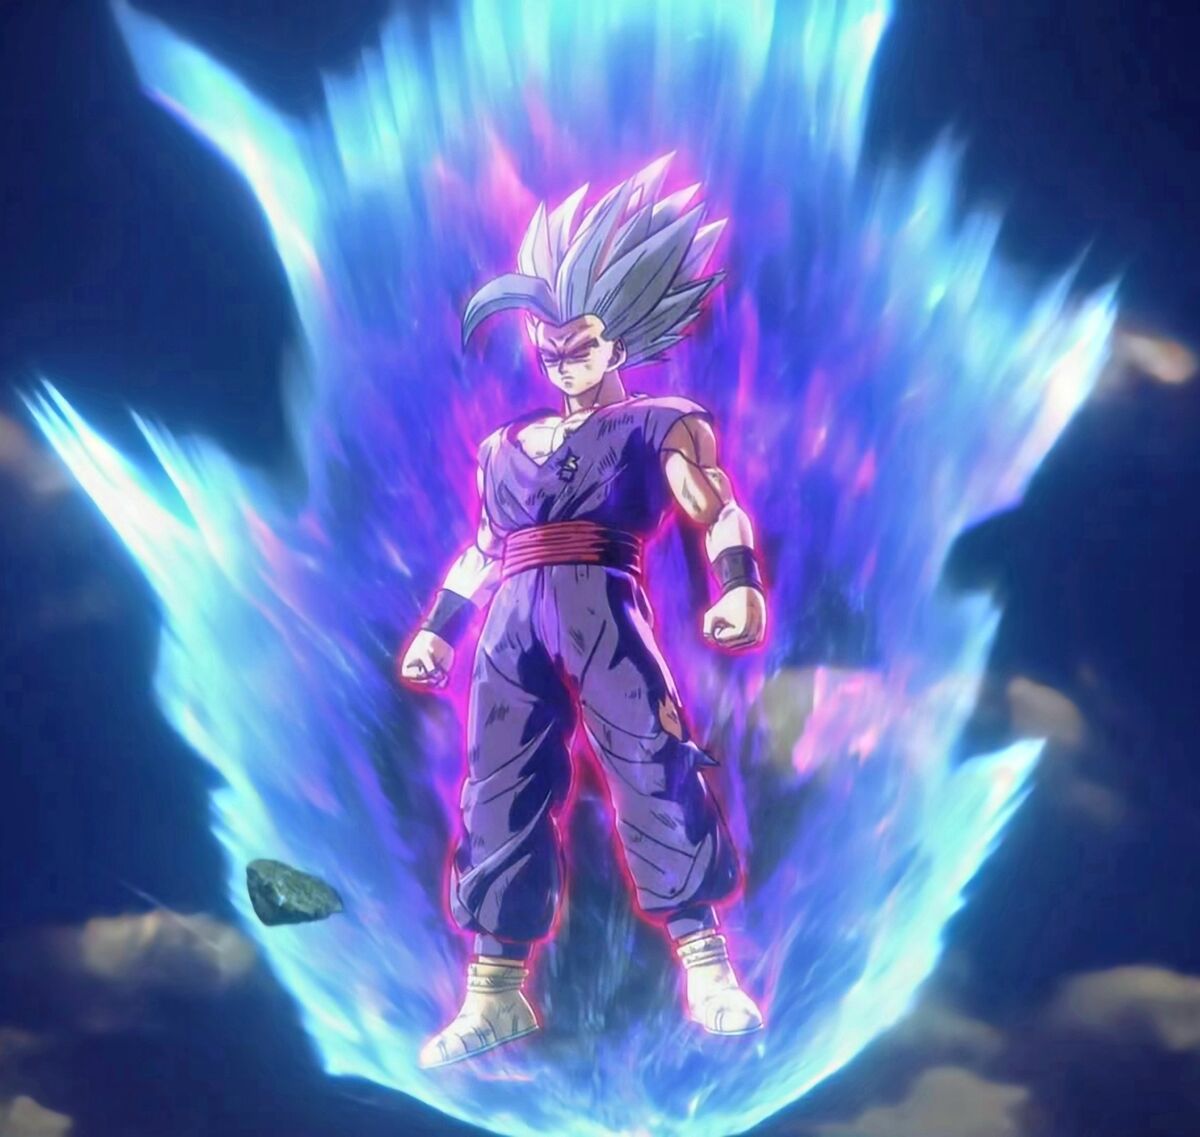 How to Unlock Beast Form in Dragon Ball Xenoverse 2